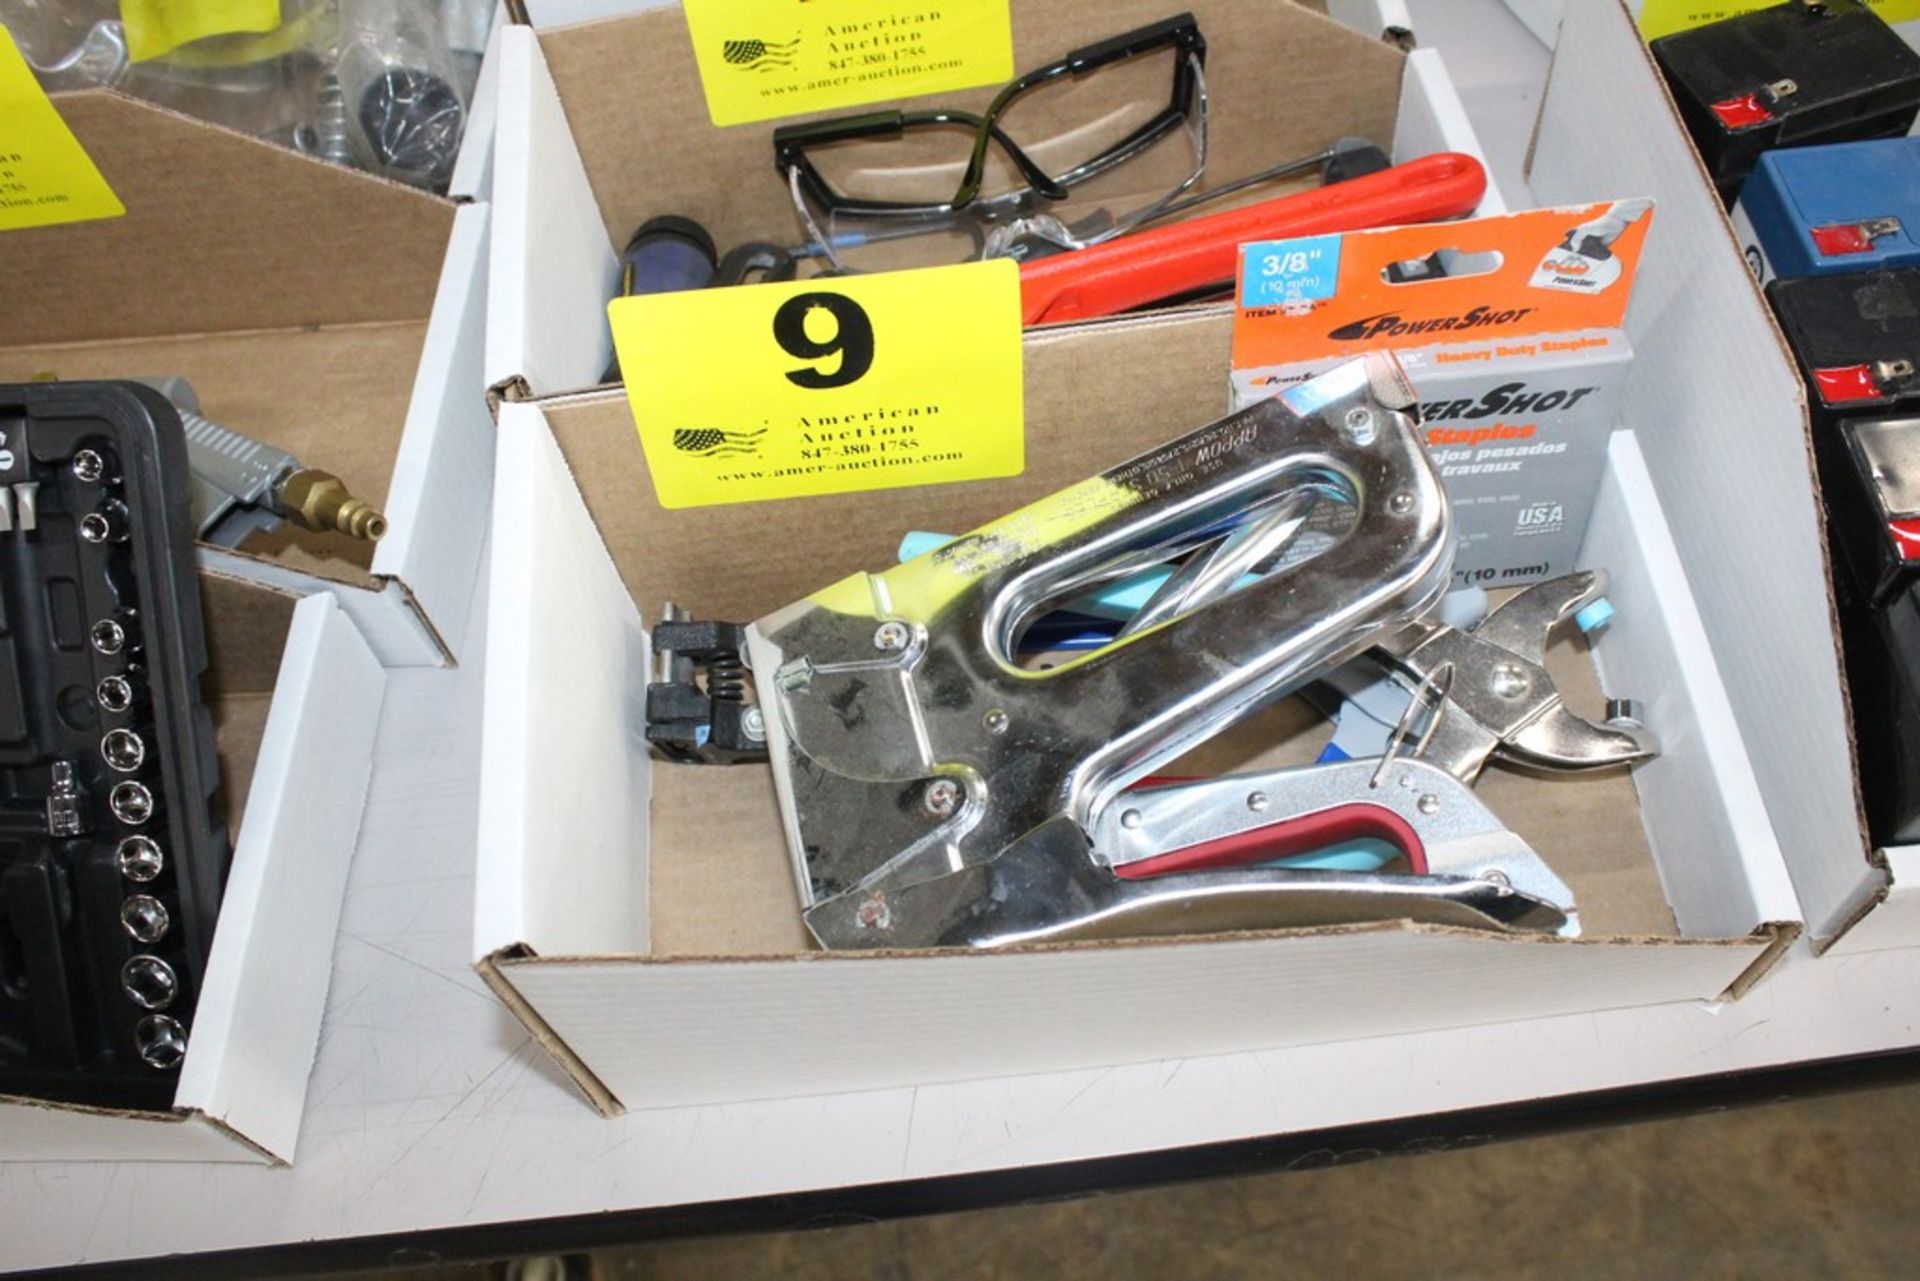 STAPLE GUNS AND PUNCHES IN BOX